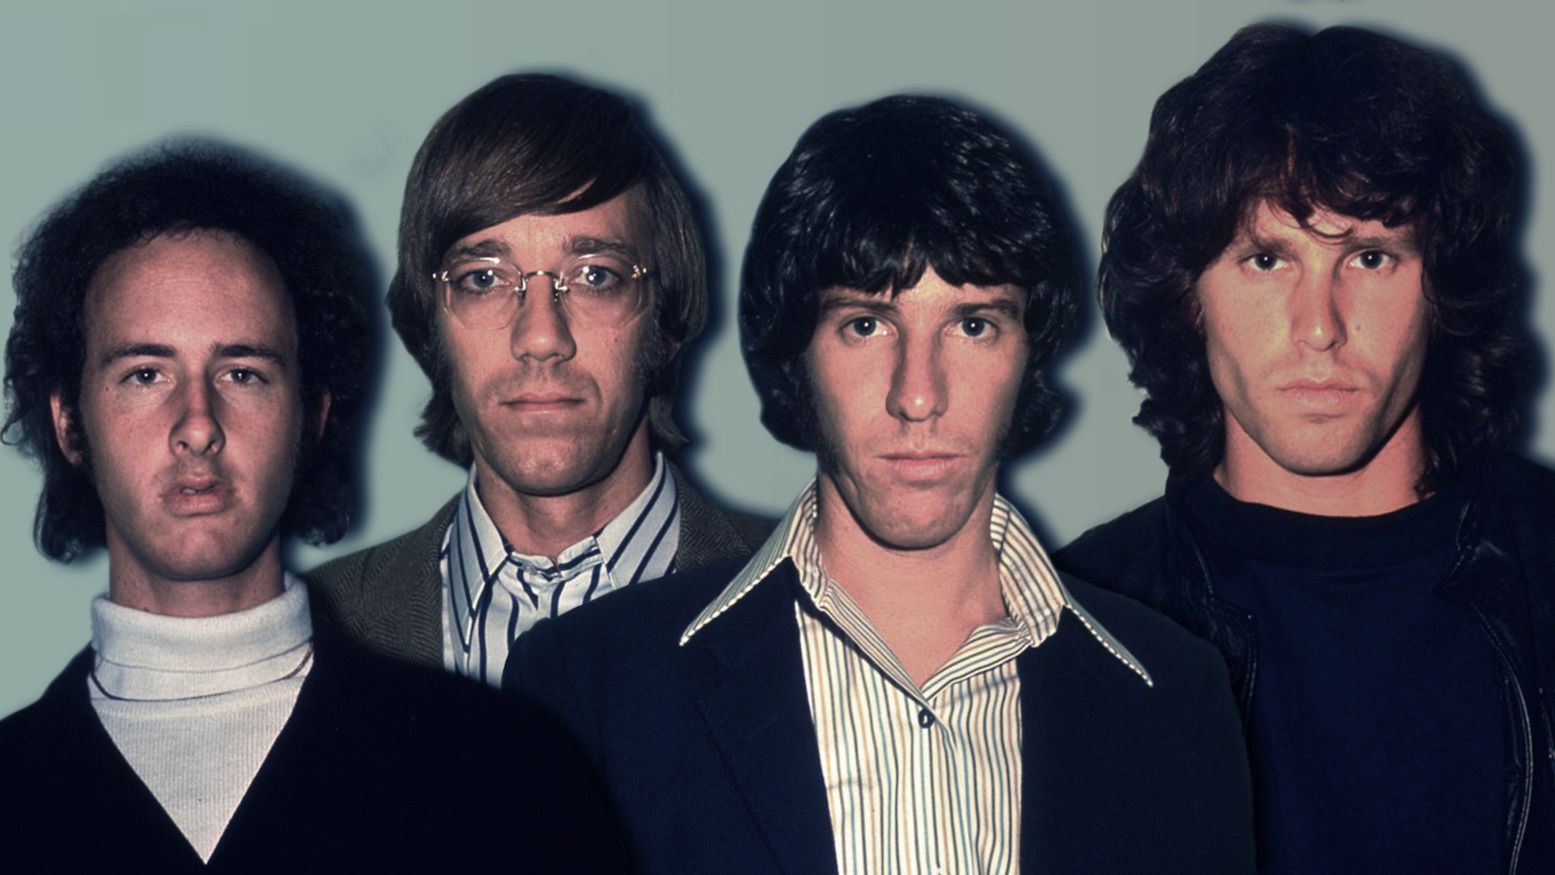 🎸 Pick 16 of Your Favorite Classic Rock Songs and We’ll Guess Your Age and Gender The Doors